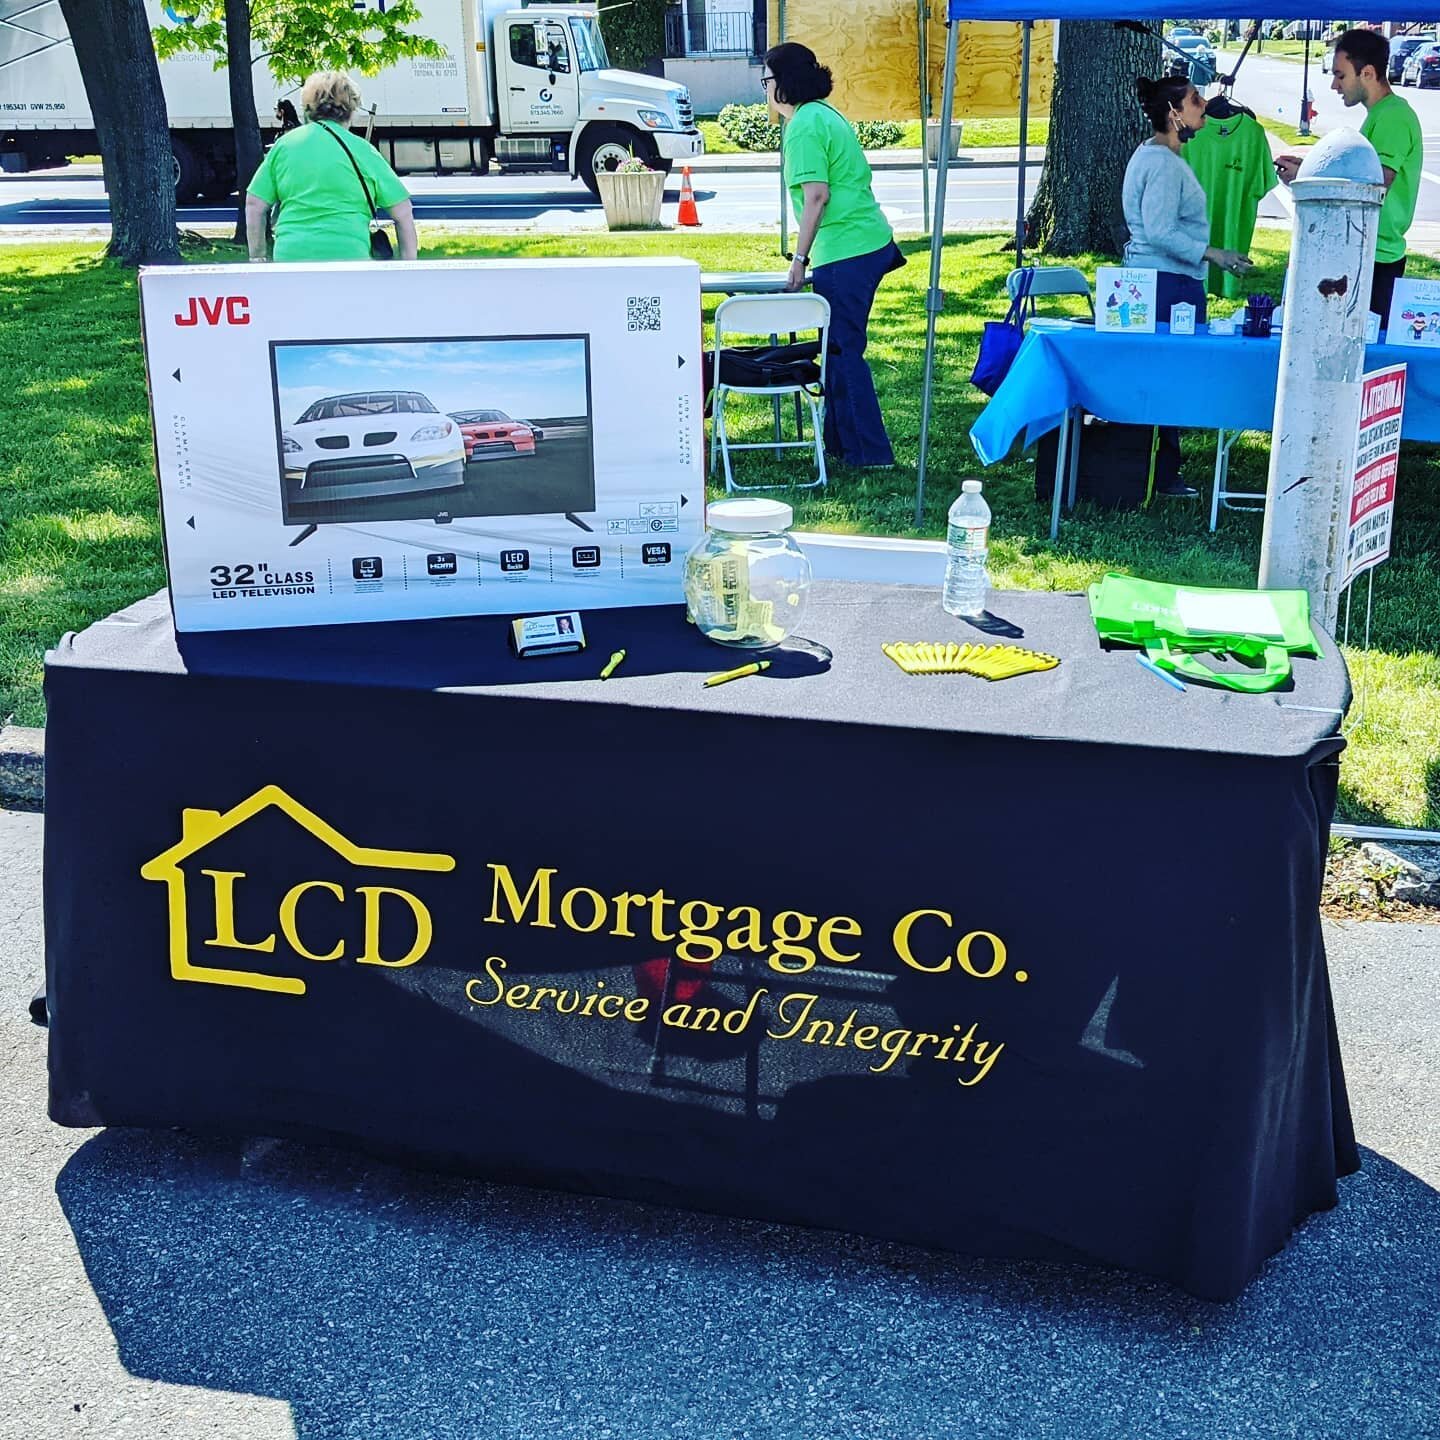 It's a beautiful day for Totowa's Farmer's Market! I'll be raffling off a tv, free to enter if you stop by! @totowarec @totowapl #lcdmtg #lcdmortgage